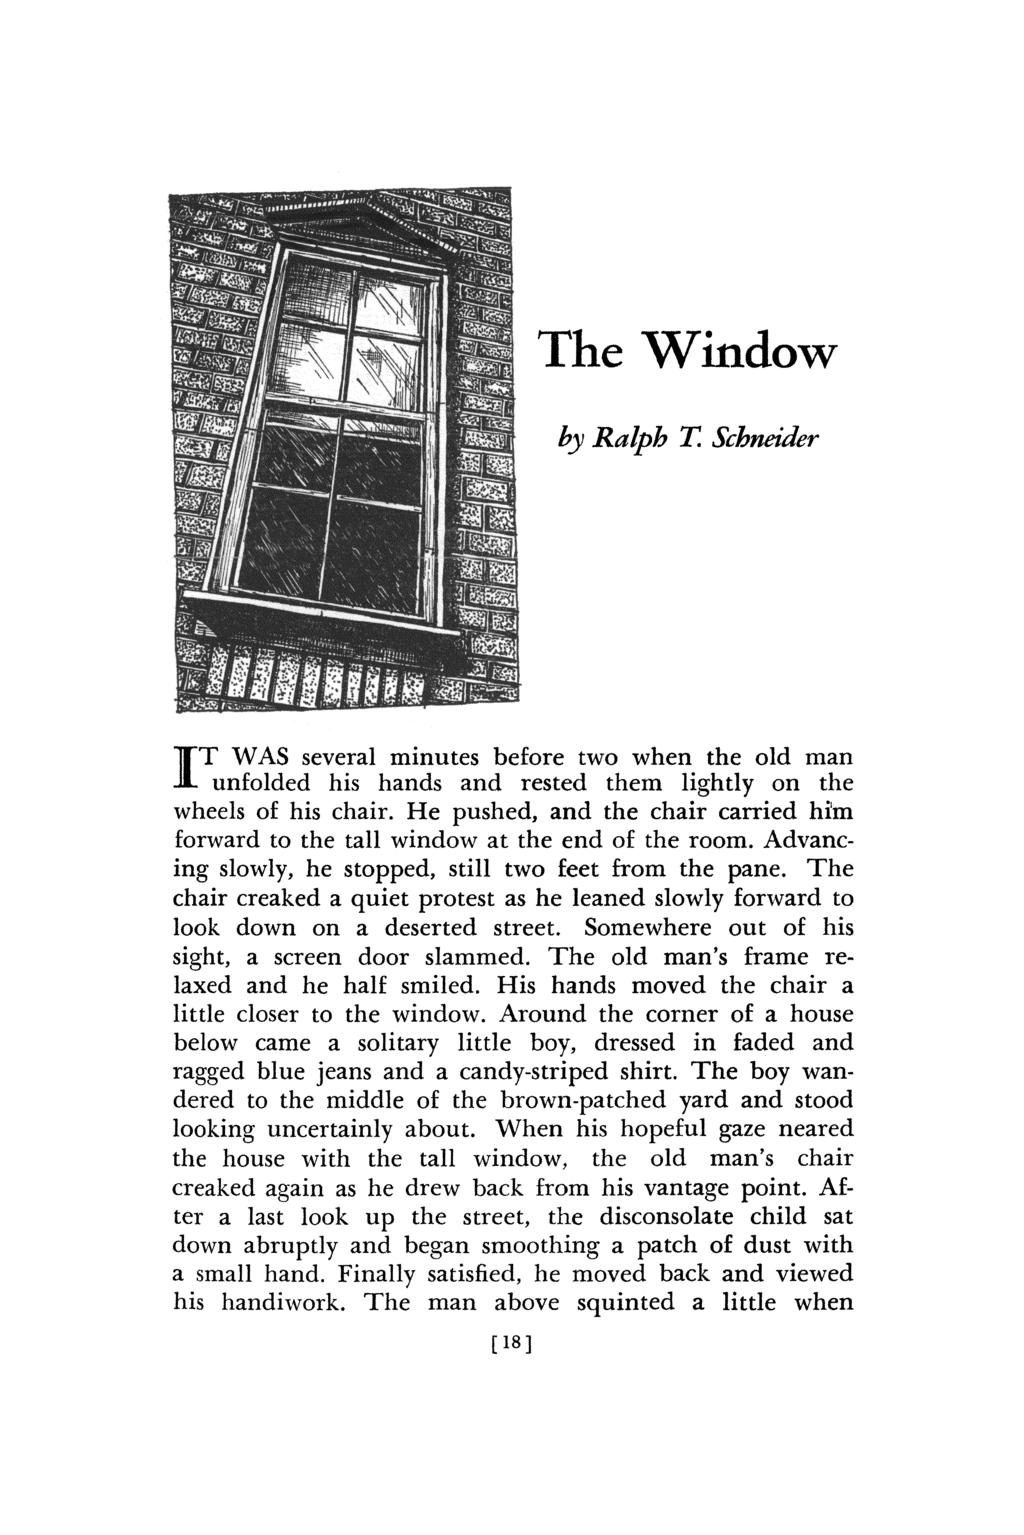 The Window by Ralph T. Schneider IT WAS several minutes before two when the old man unfolded his hands and rested them lightly on the wheels of his chair.